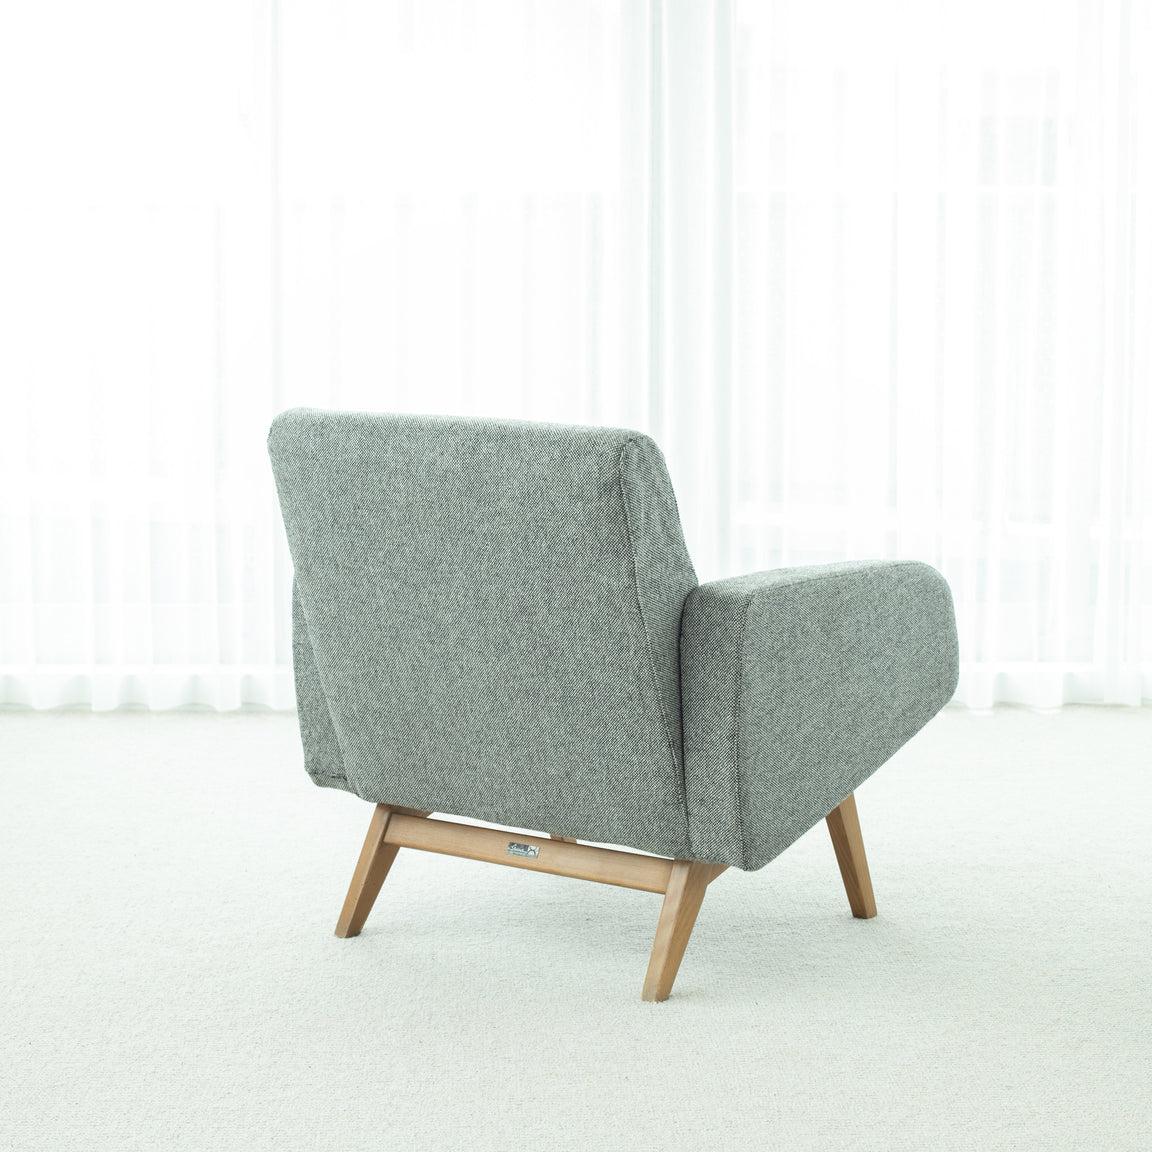 Mid-20th Century Joseph-André Motte Armchair 740 for Steiner, 1950s For Sale